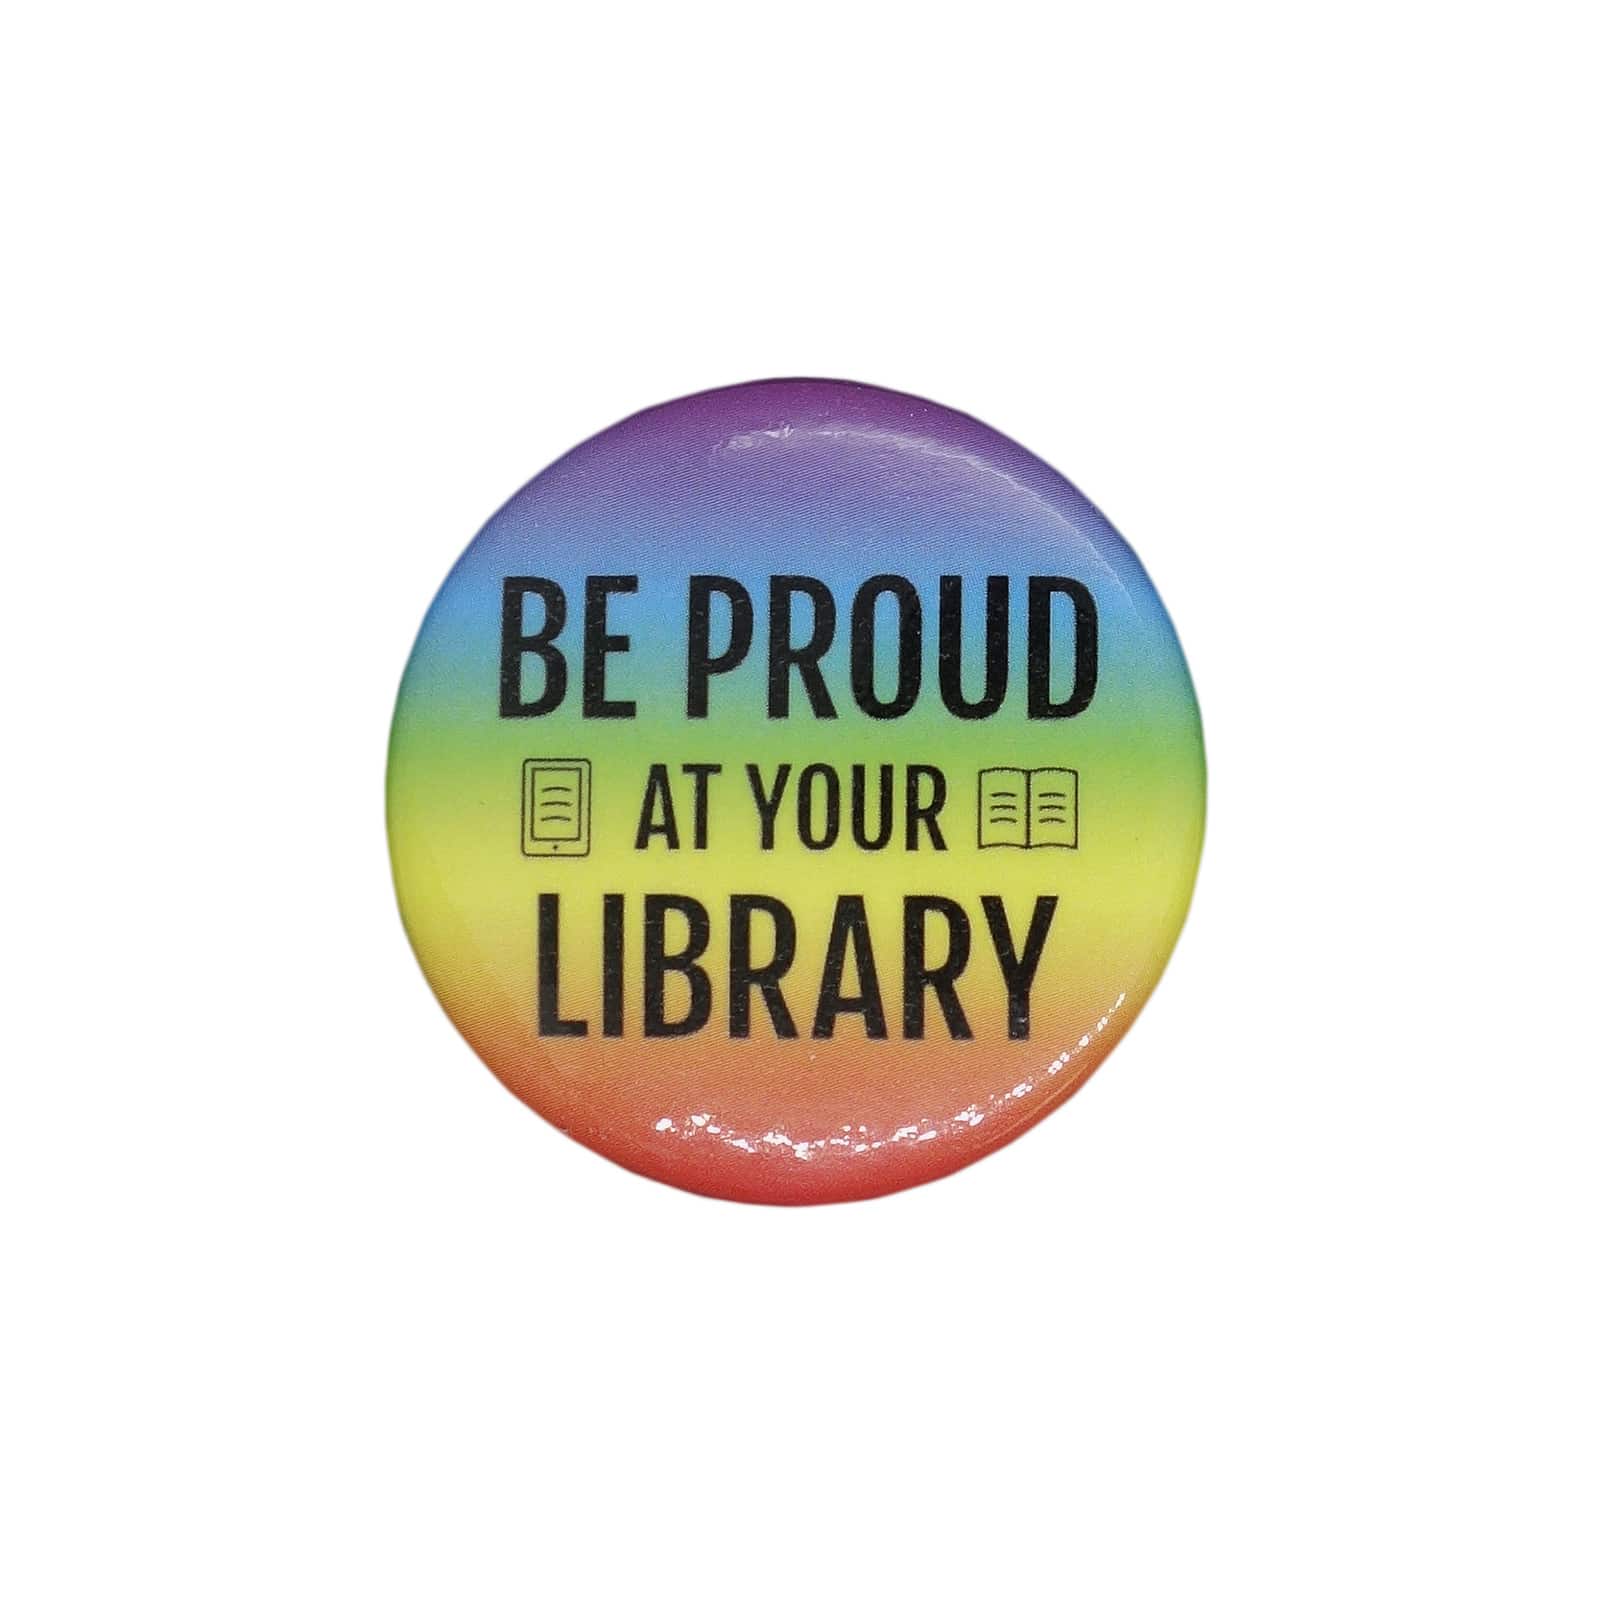 BE PROUD AT YOUR LIBRARY 缶バッジ バッチ